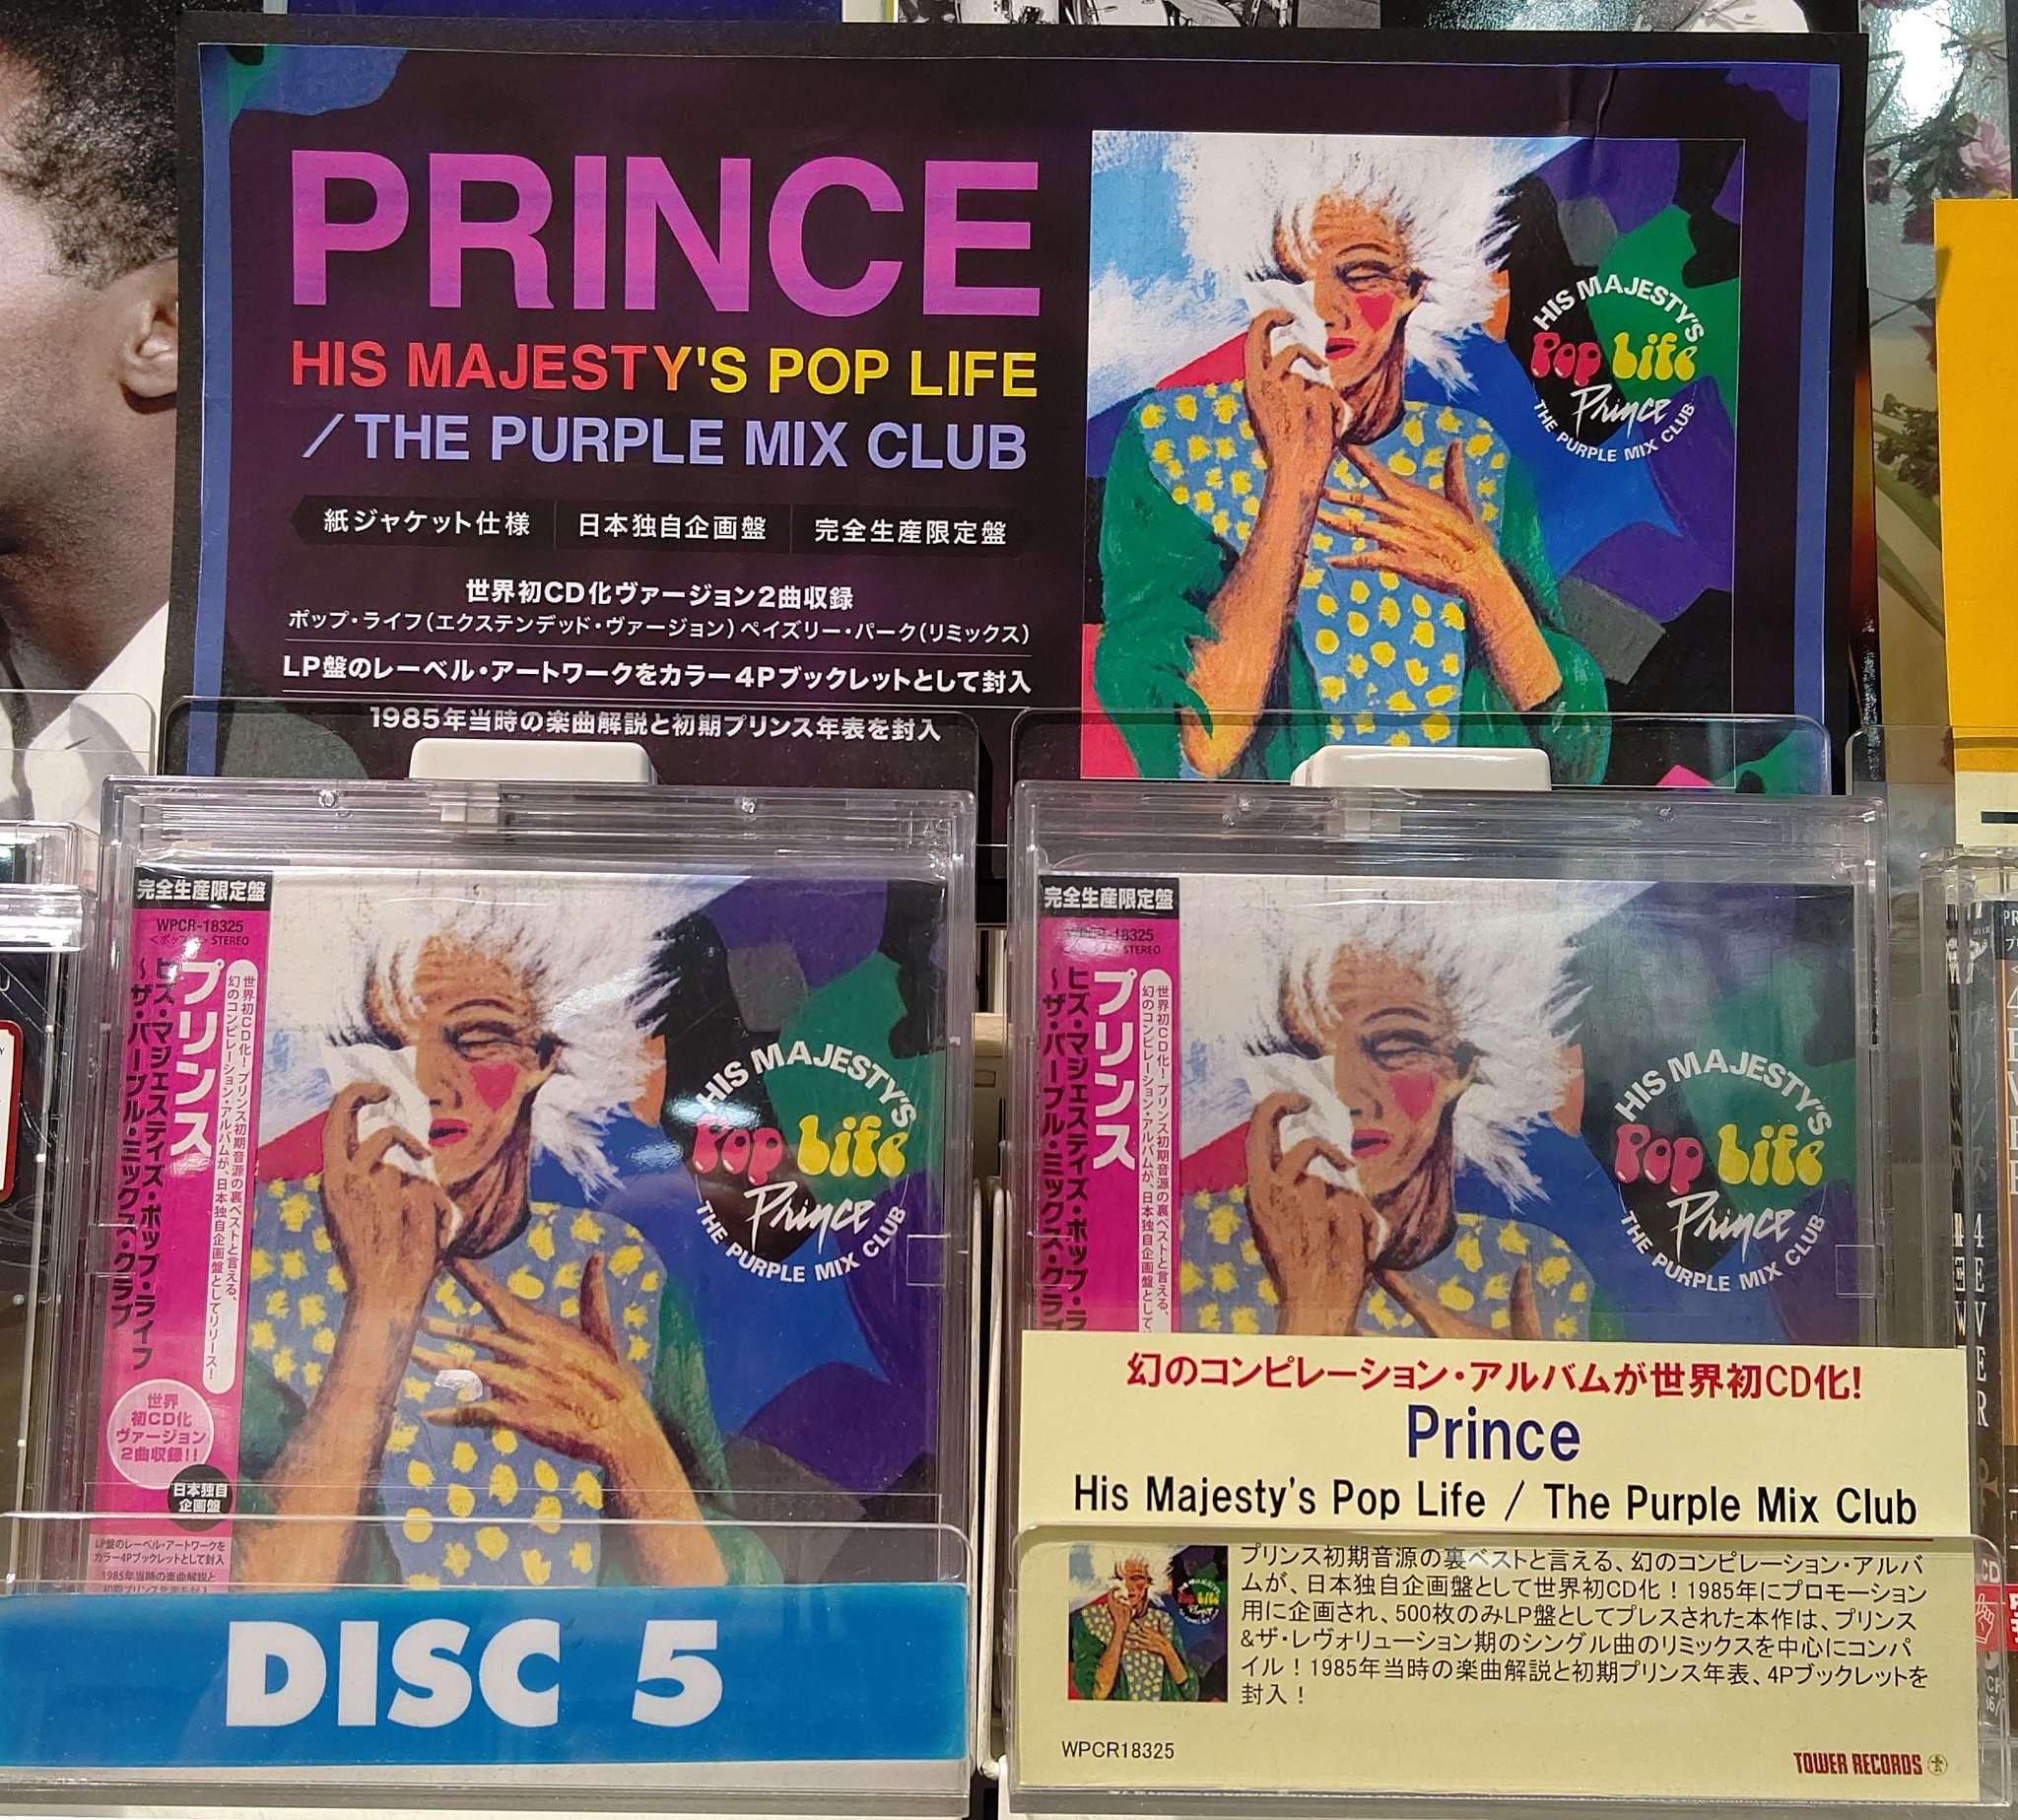 Pop Life The Purple Mix Club" on CD in Japan